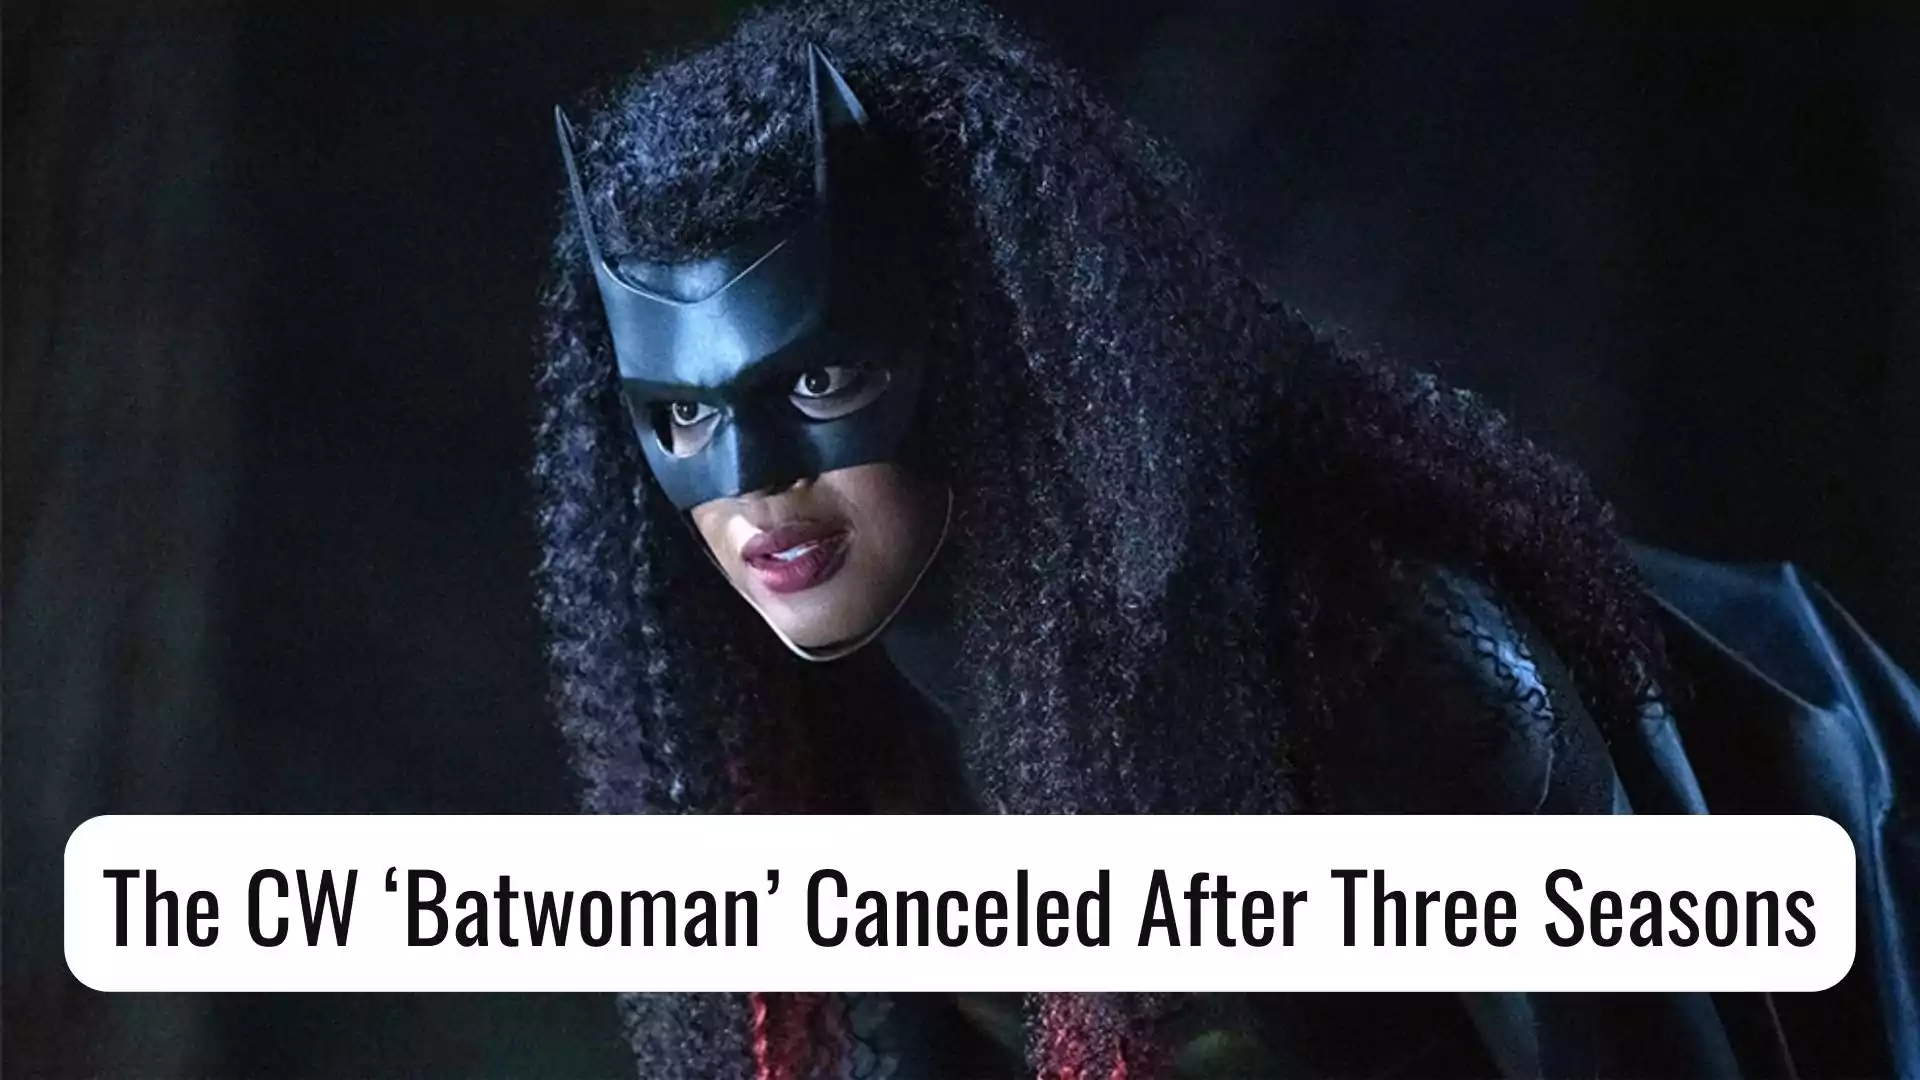 The CW ‘Batwoman’ Canceled After Three Seasons. The series was cancelled on Friday, it will not renewed for season 4.